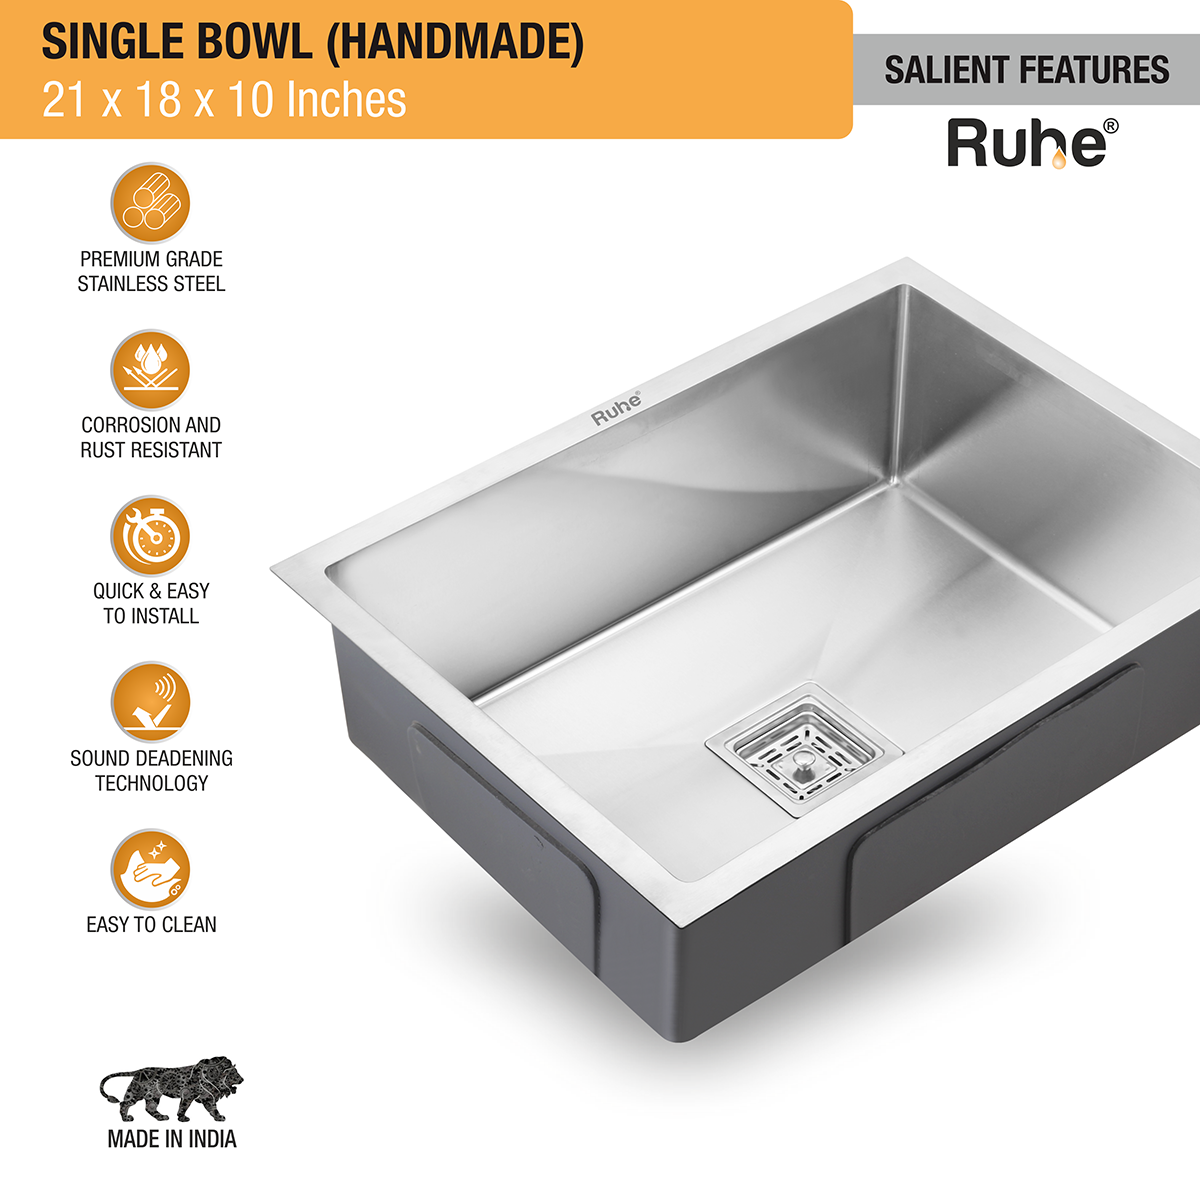 Handmade Single Bowl Premium Stainless Steel Kitchen Sink (21 x 18 x 10 Inches) features and benefits